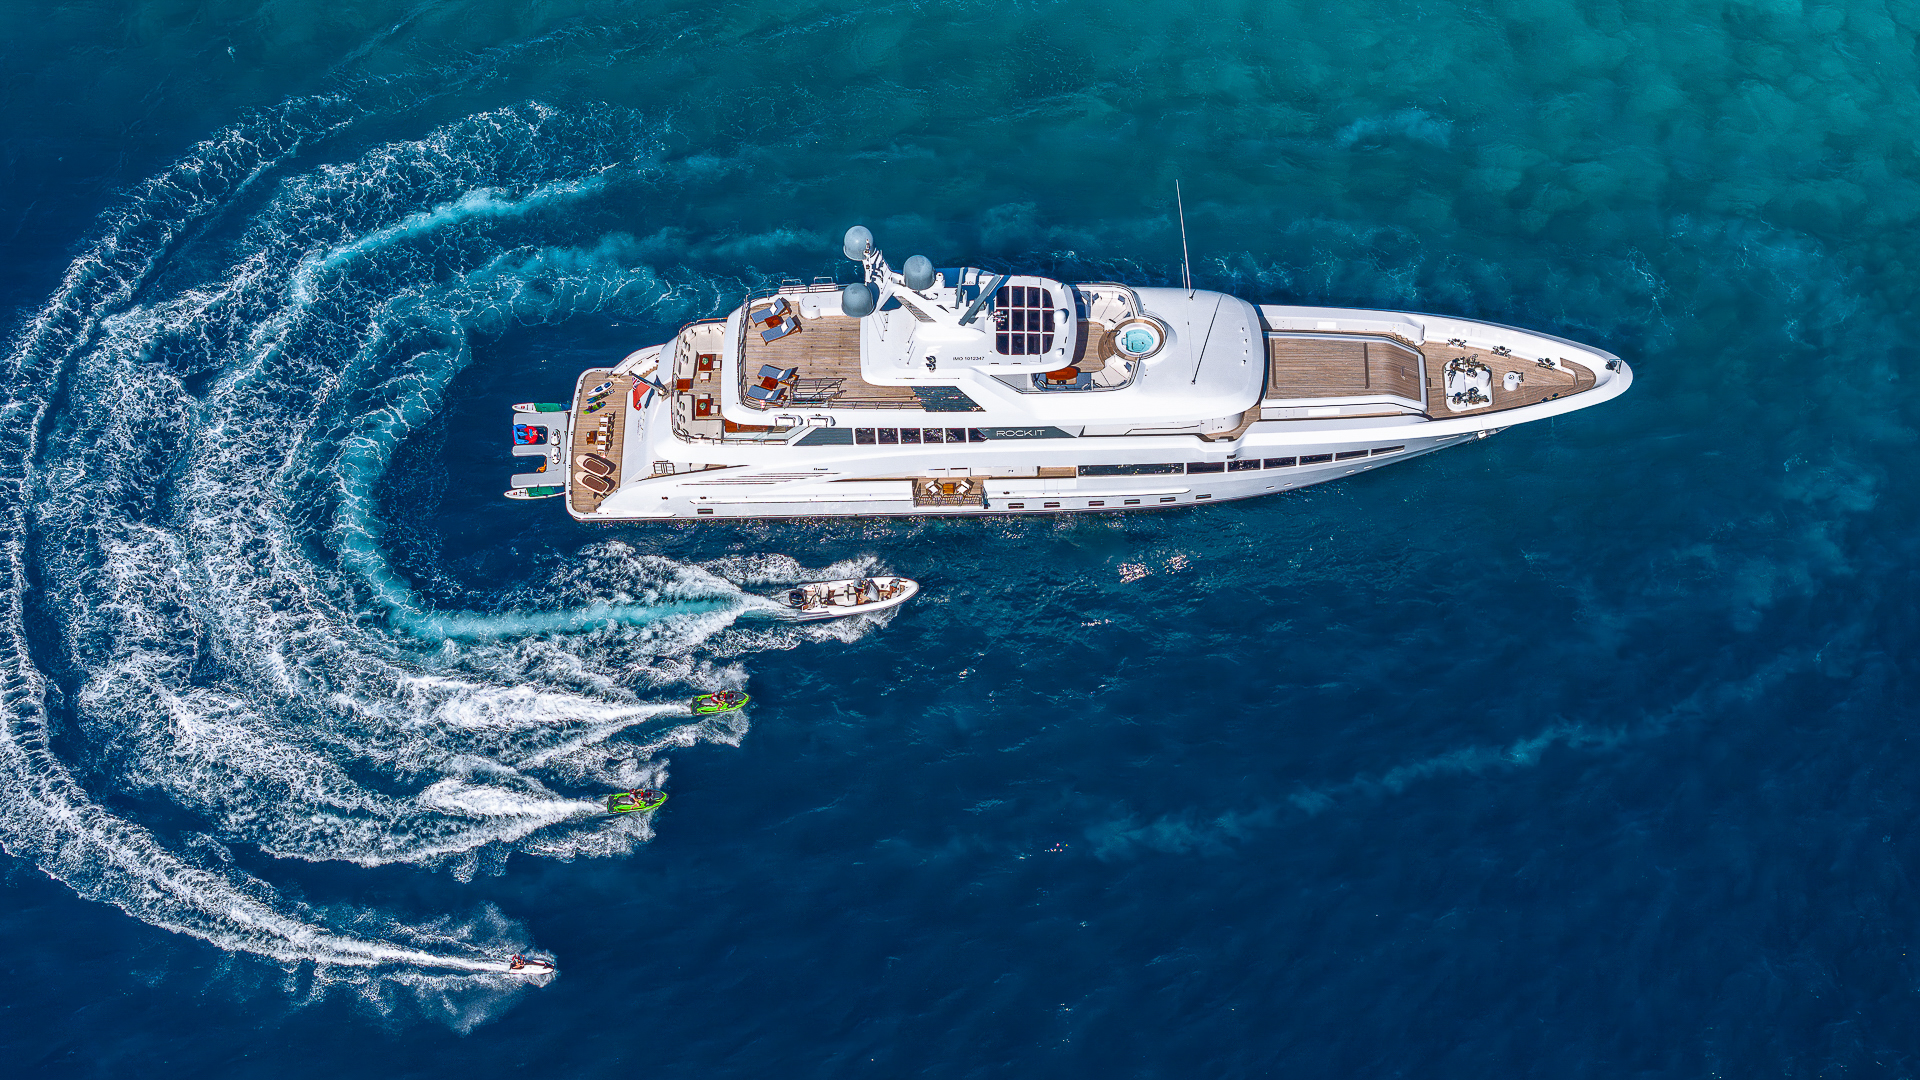 Rock It Aerial View With Toys Running - Credit Yachting Image